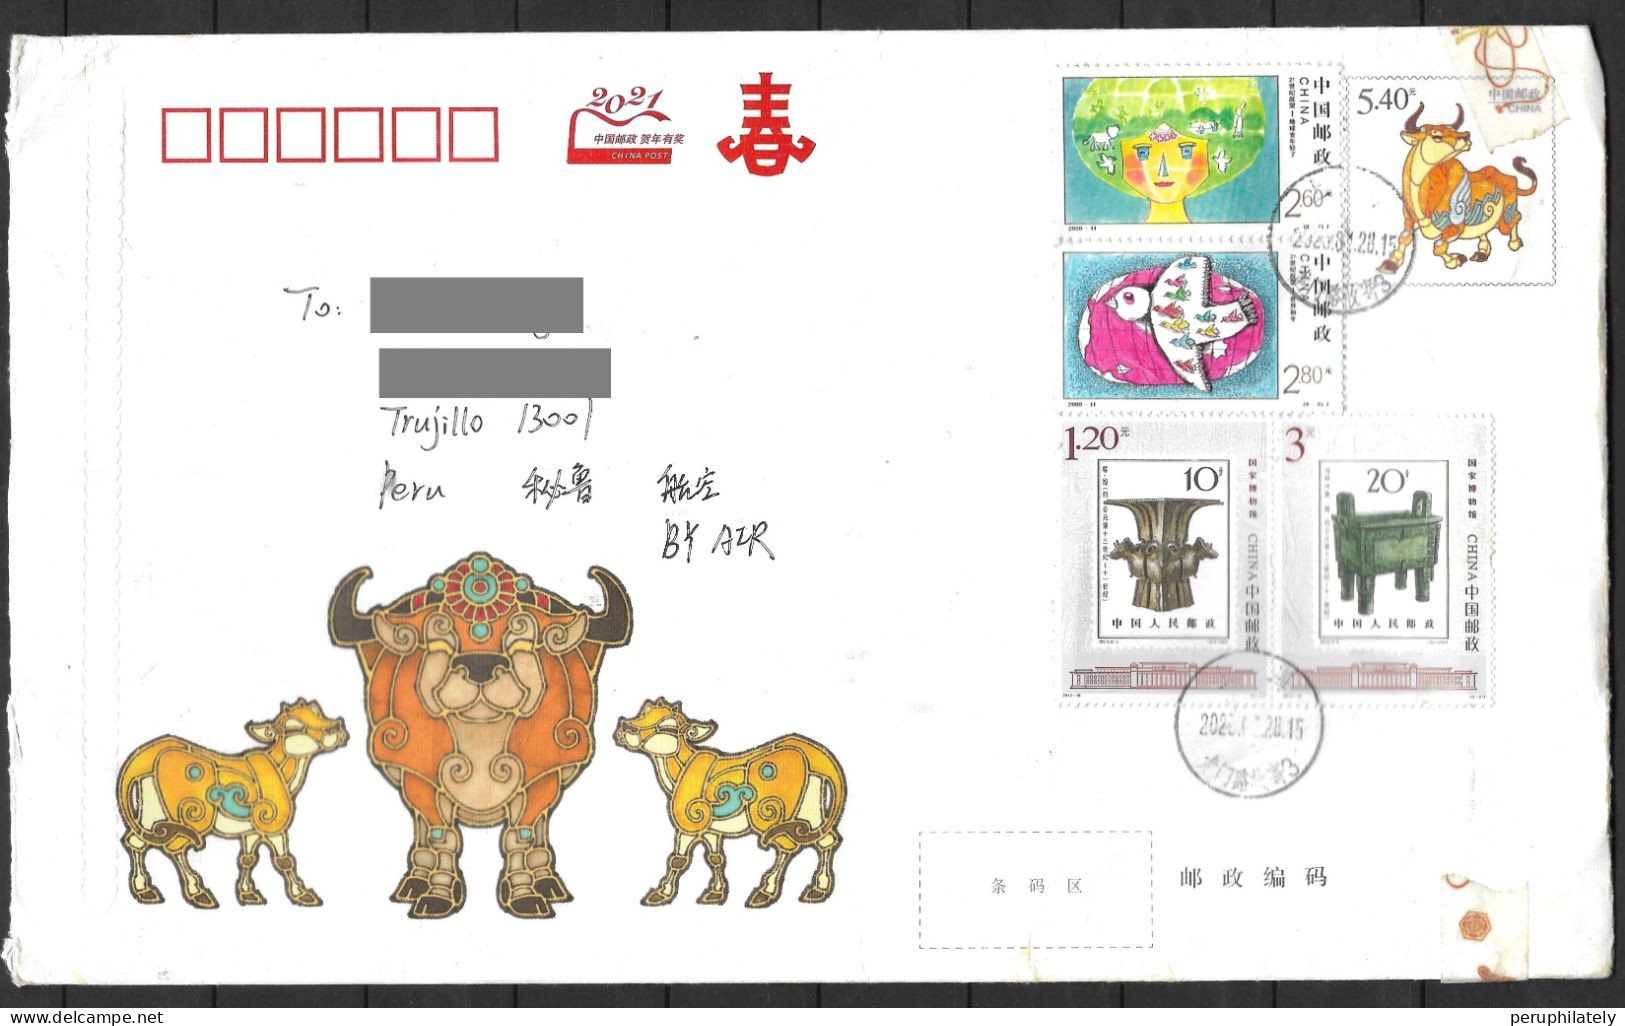 China Year Of The Ox Cover With Bird Stamps Sent To Peru - Usados